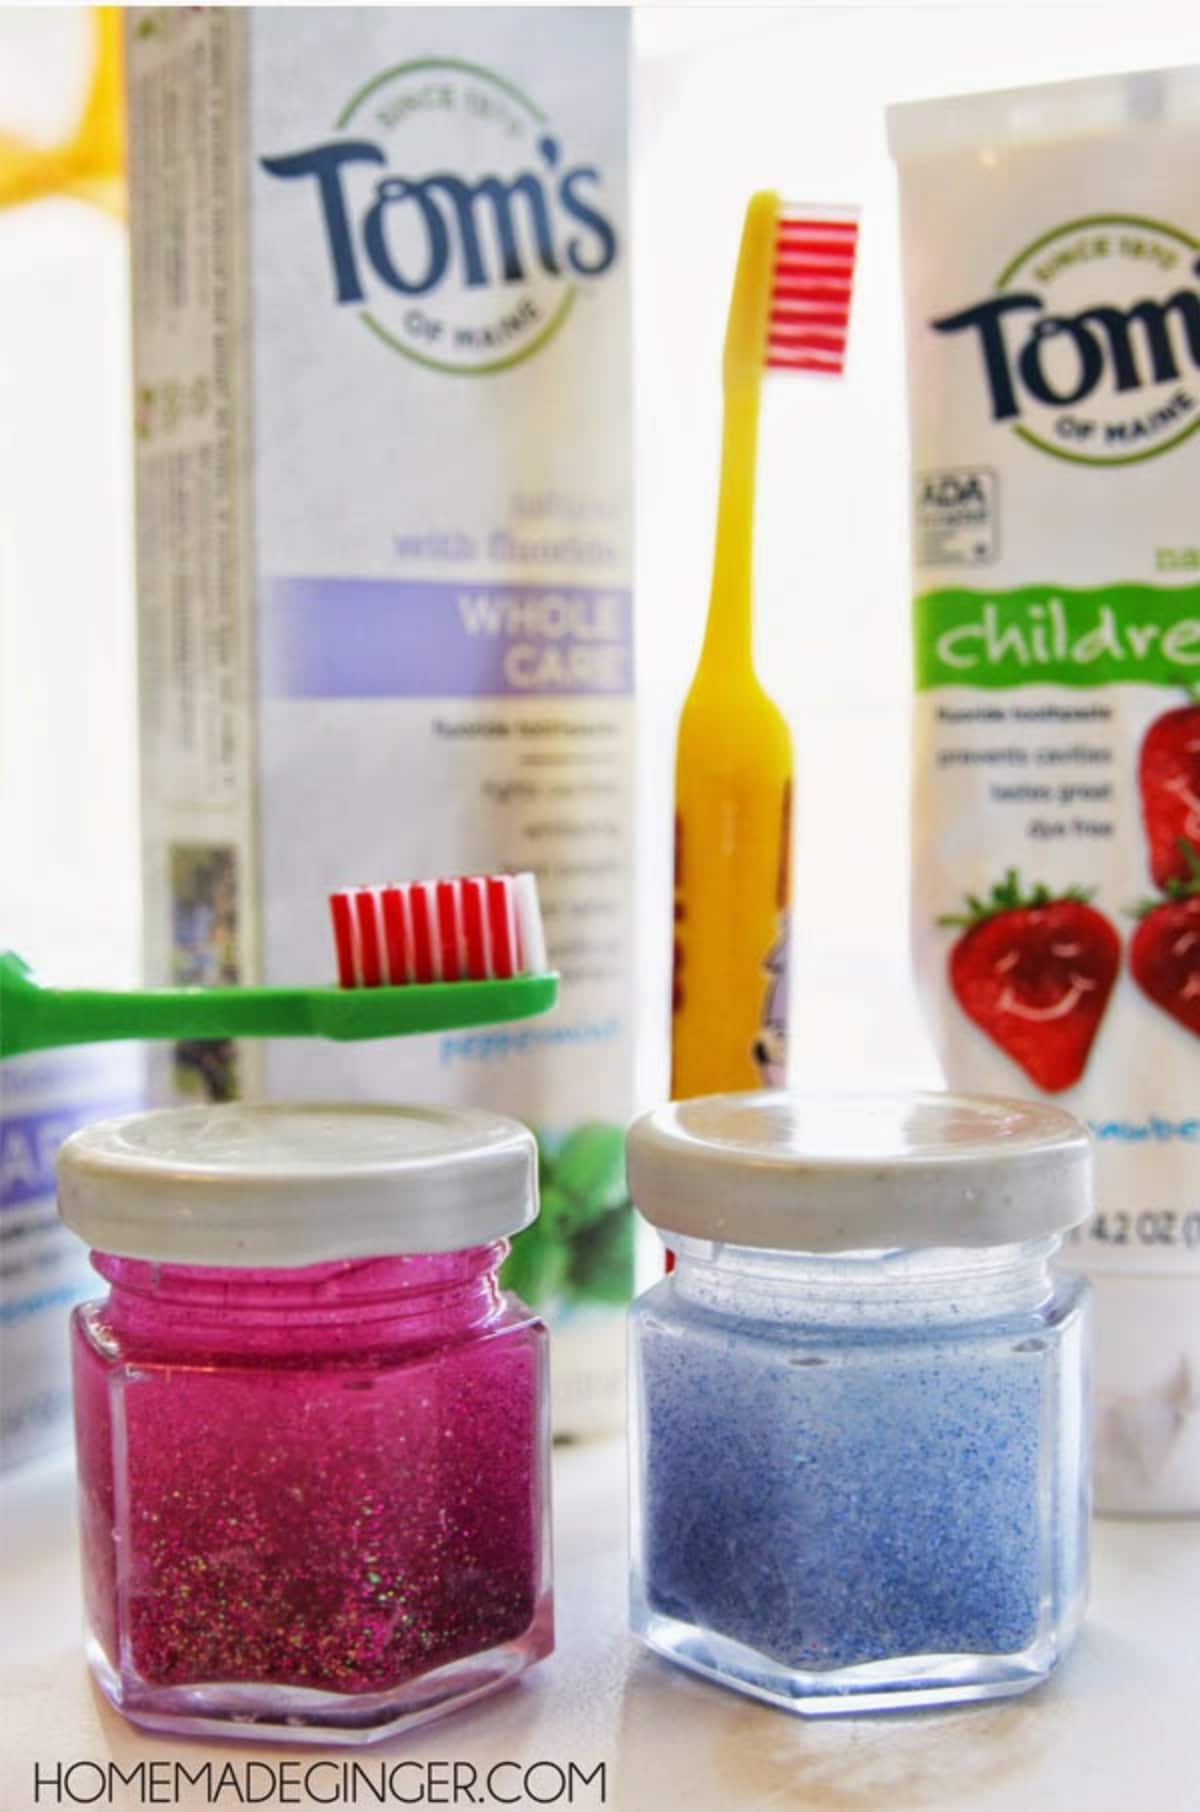 Glitter in a jar and toothbrush